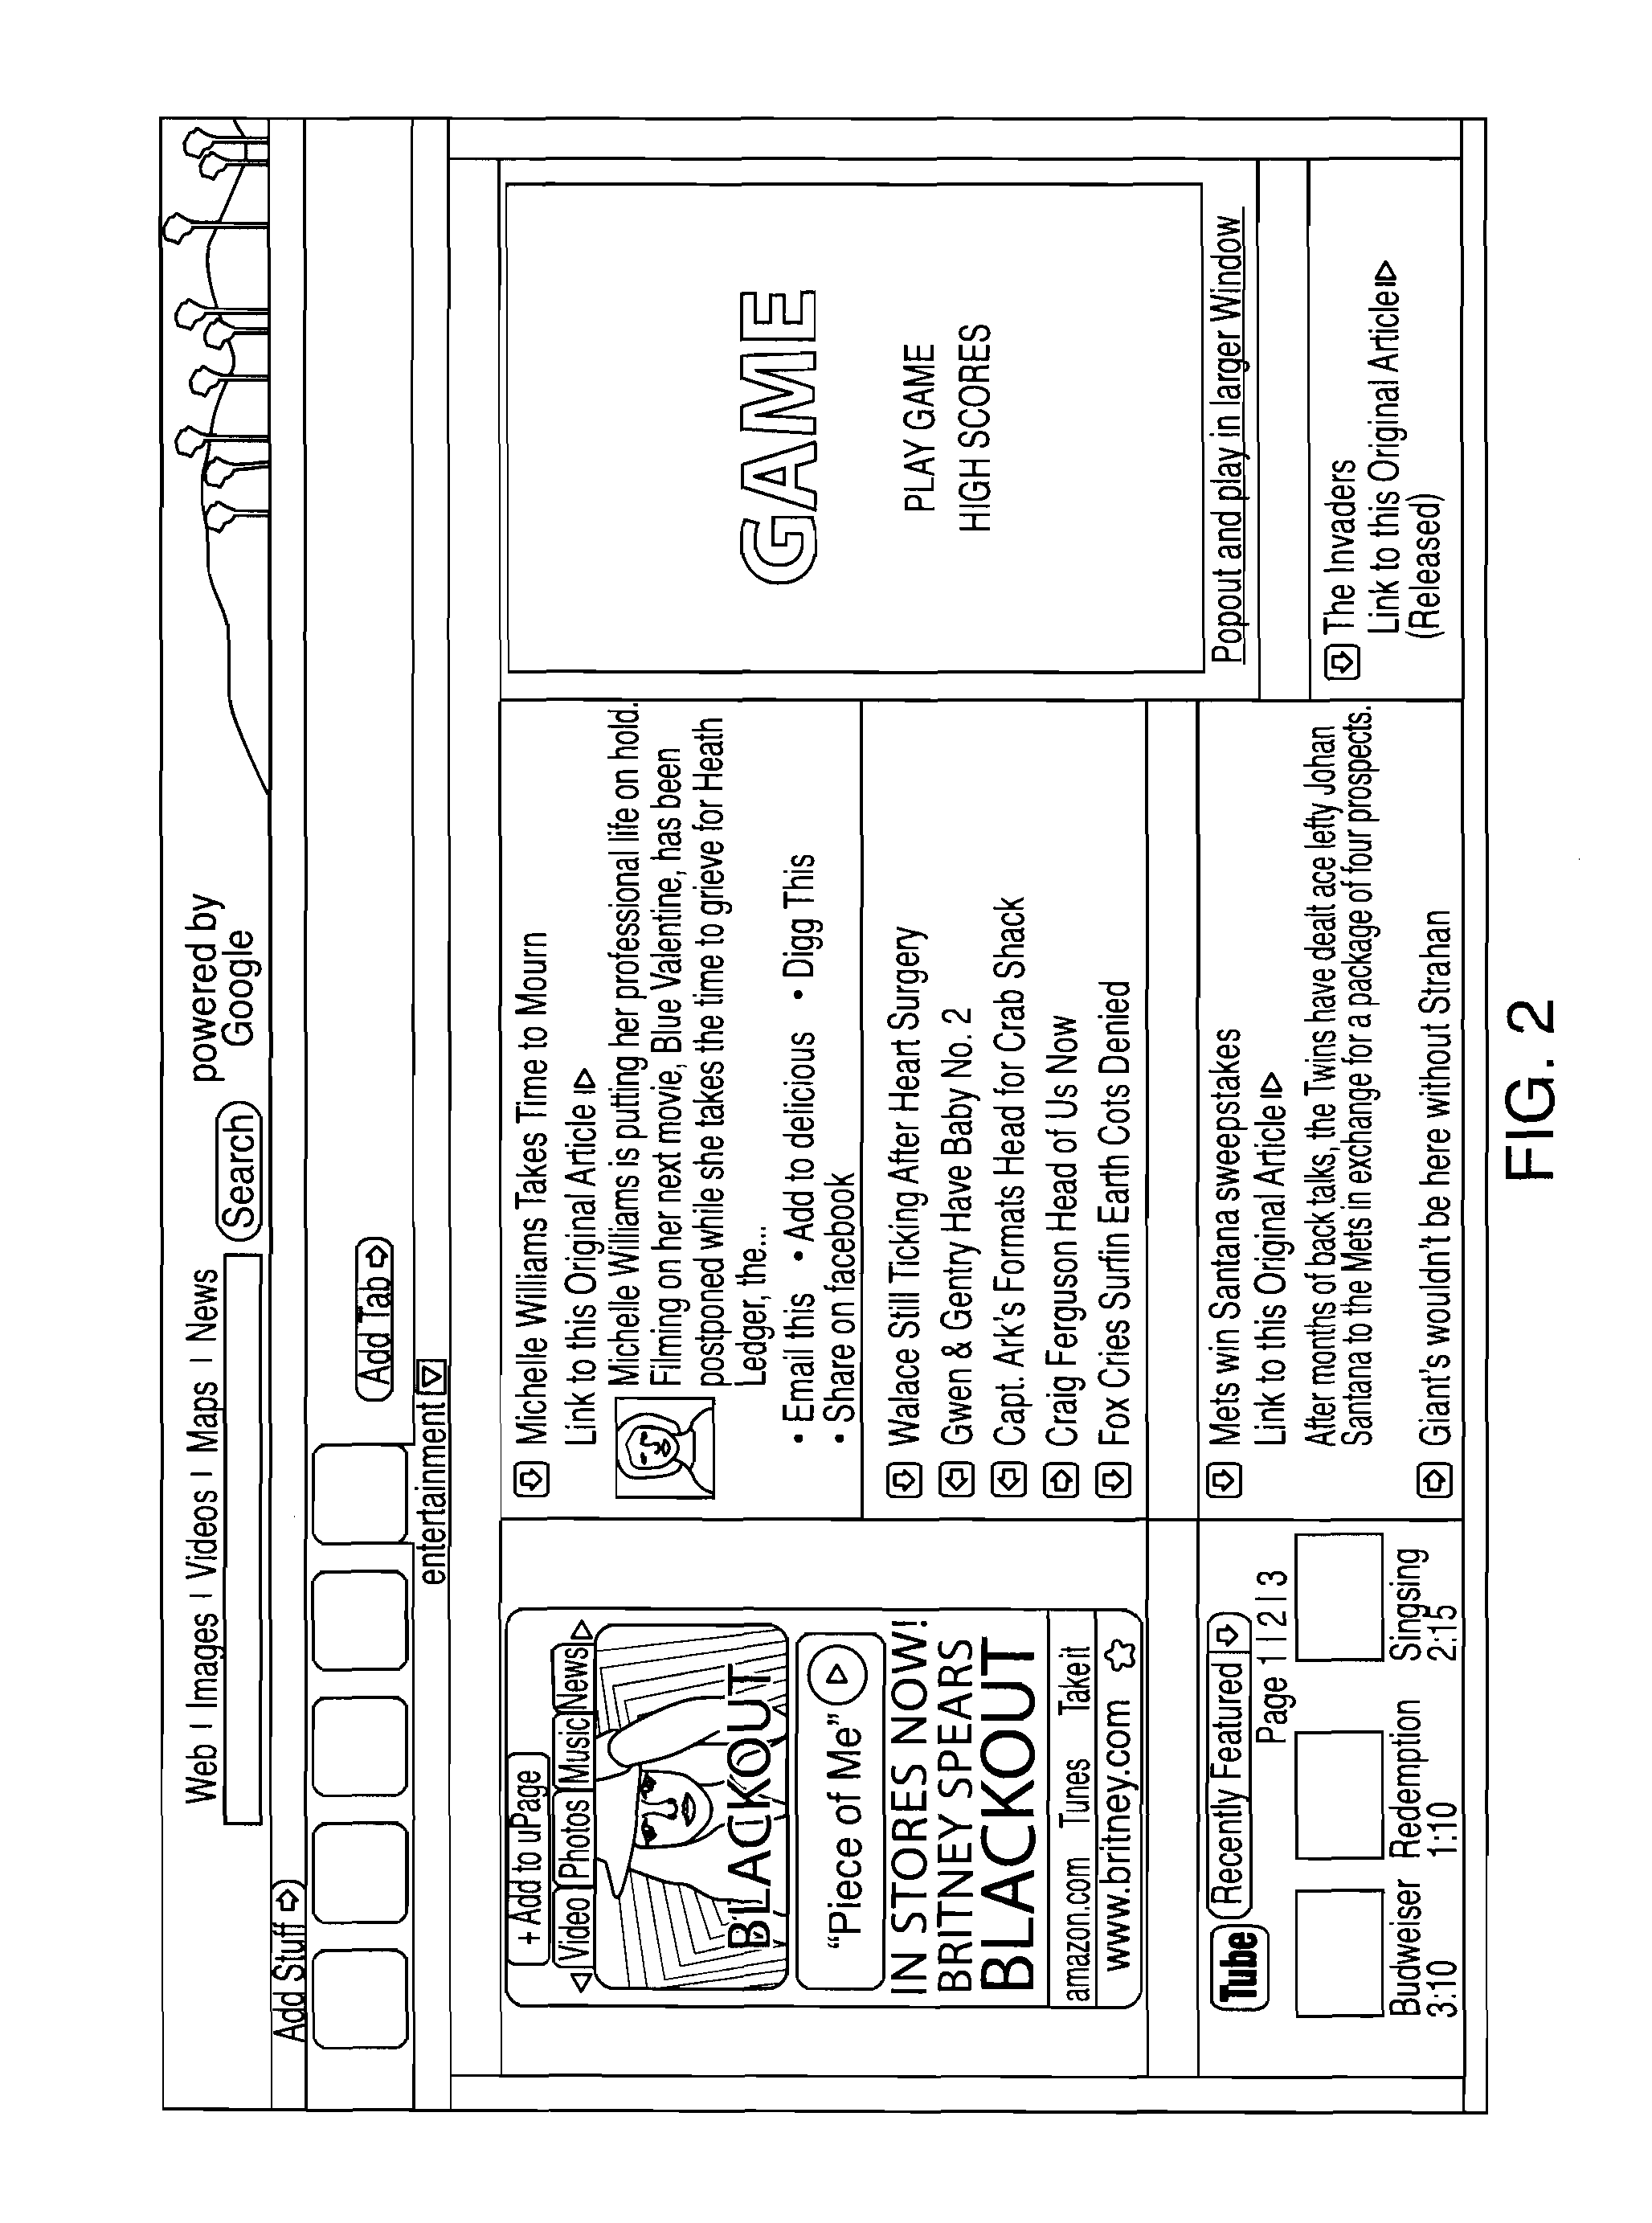 Device and Method for Creating, Distributing, Managing and Monetizing Widgets in a Mobile Environment